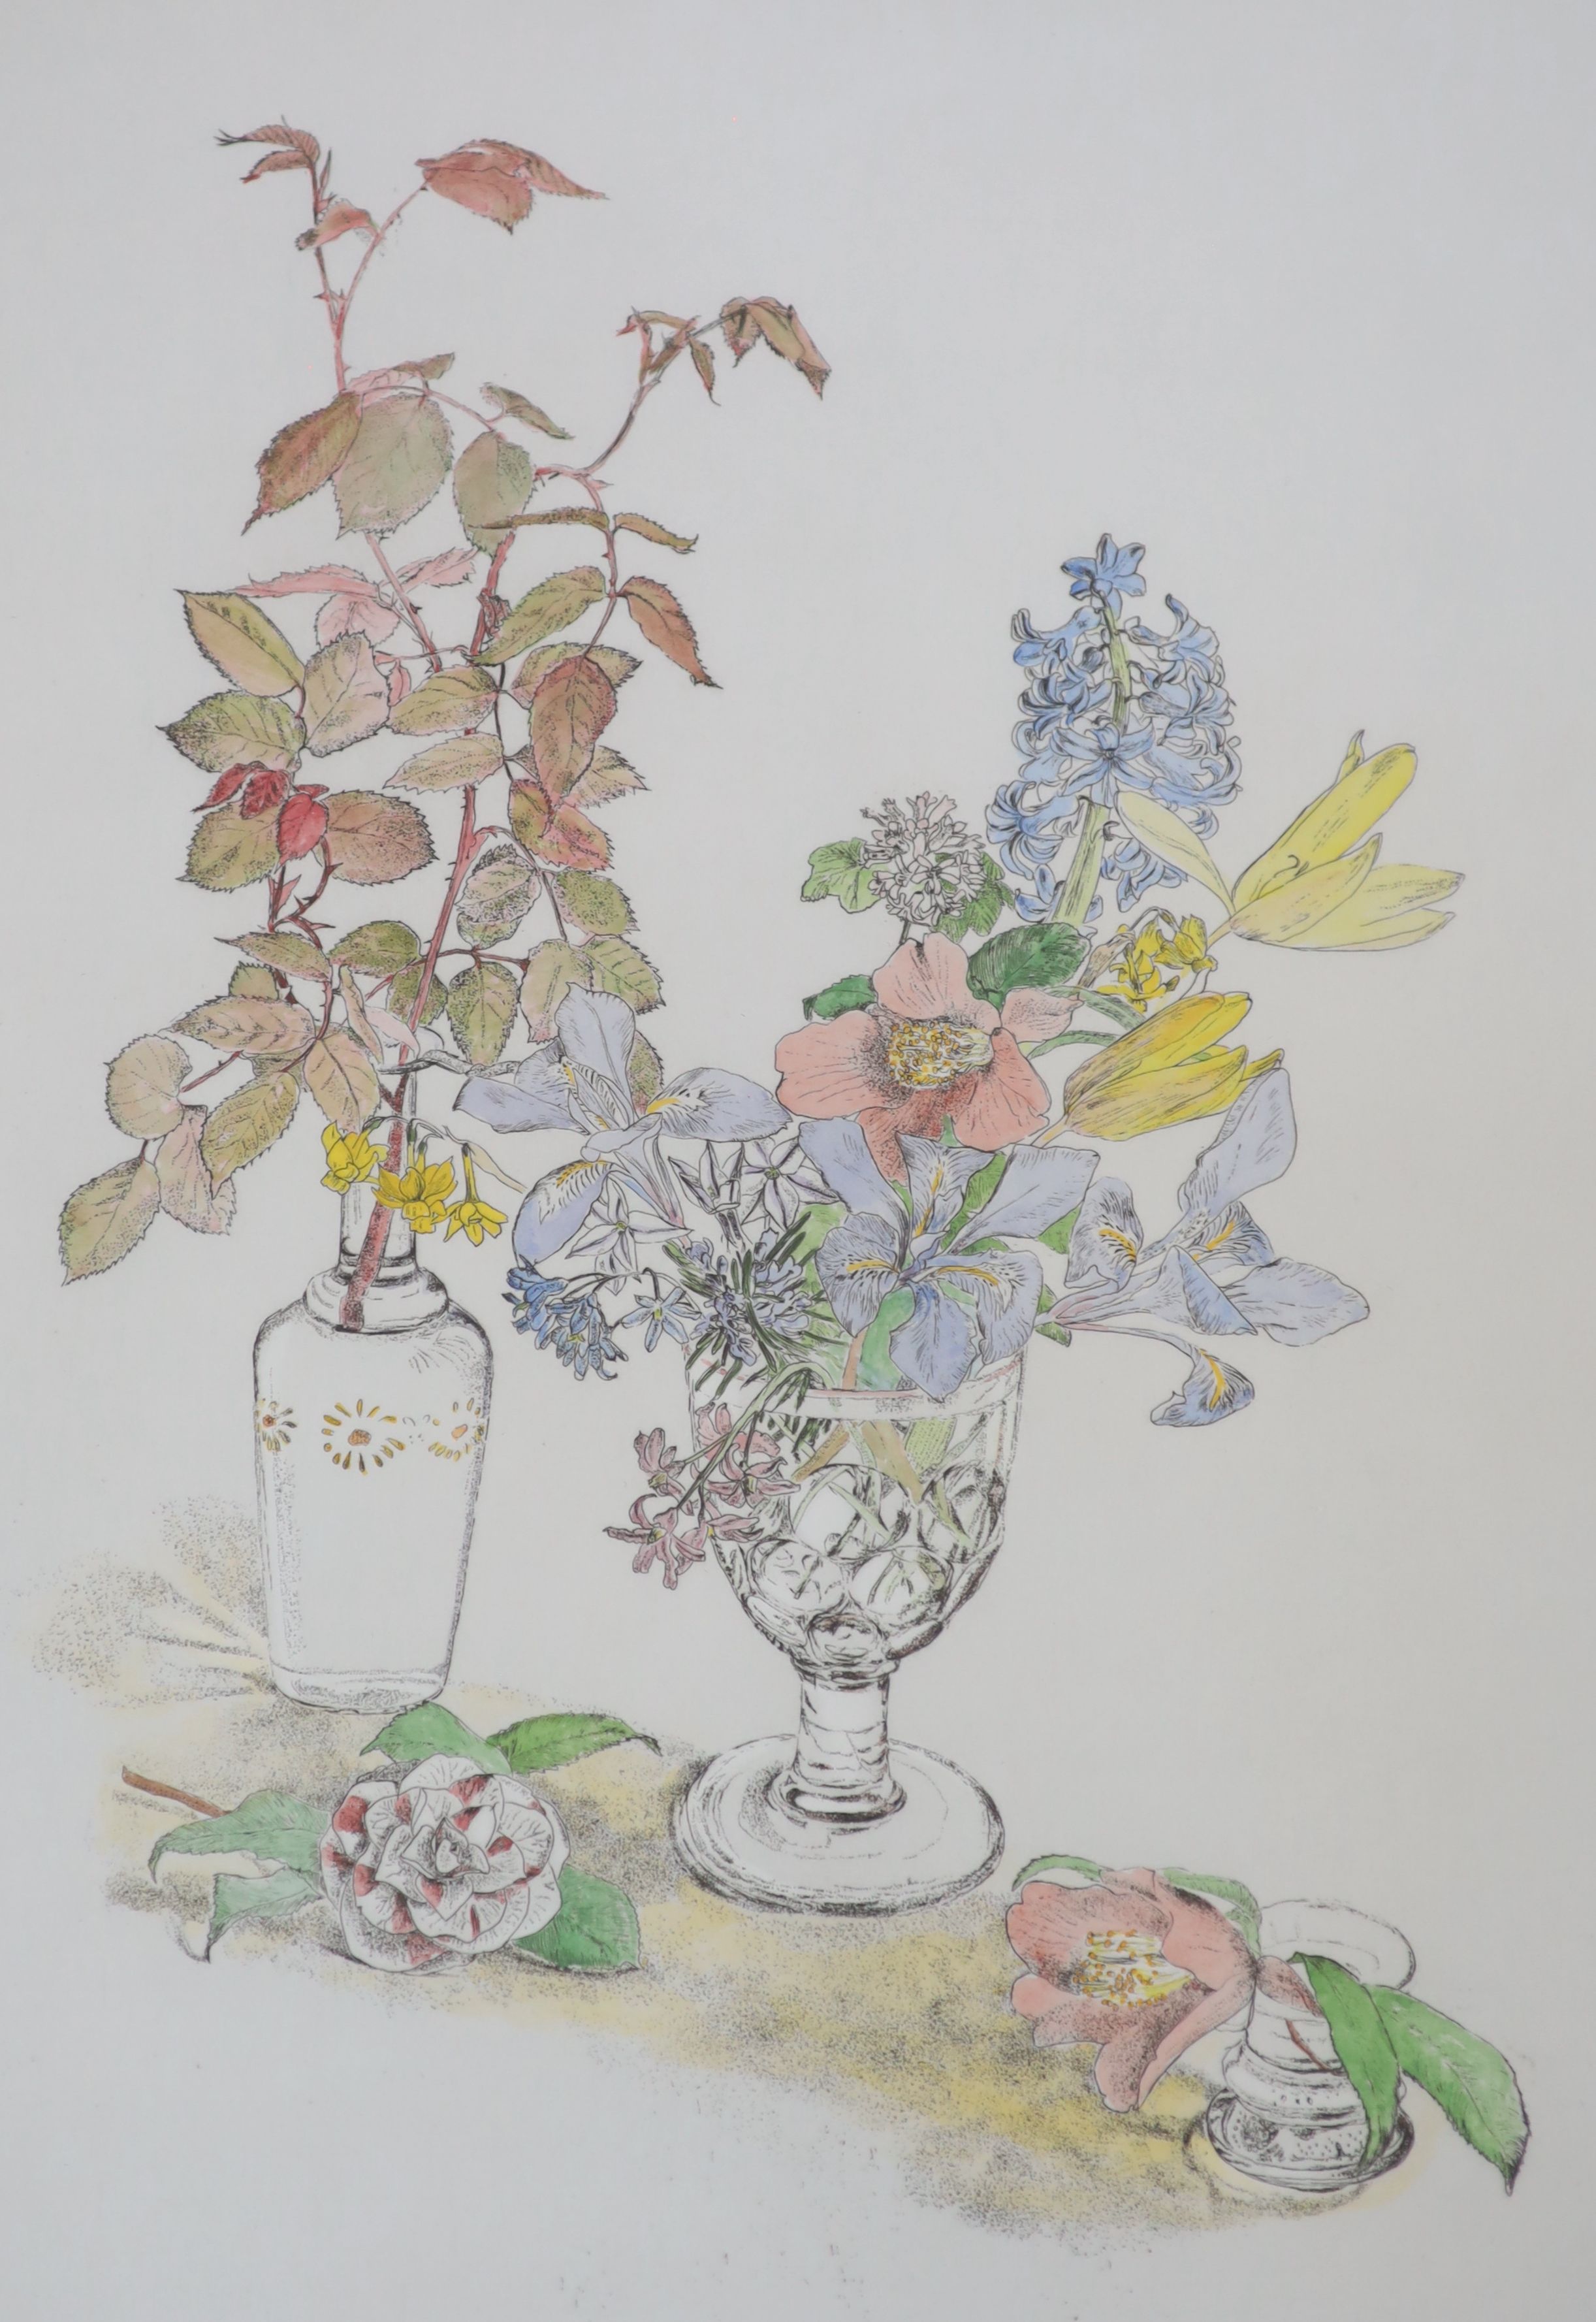 Gillian Whaite (1934-2012), etching and watercolour, 'Flowers', signed, 30/60, 59 x 44cm and R. A.Elliott, watercolour, Untitled, signed in pencil, 69 x 48cm